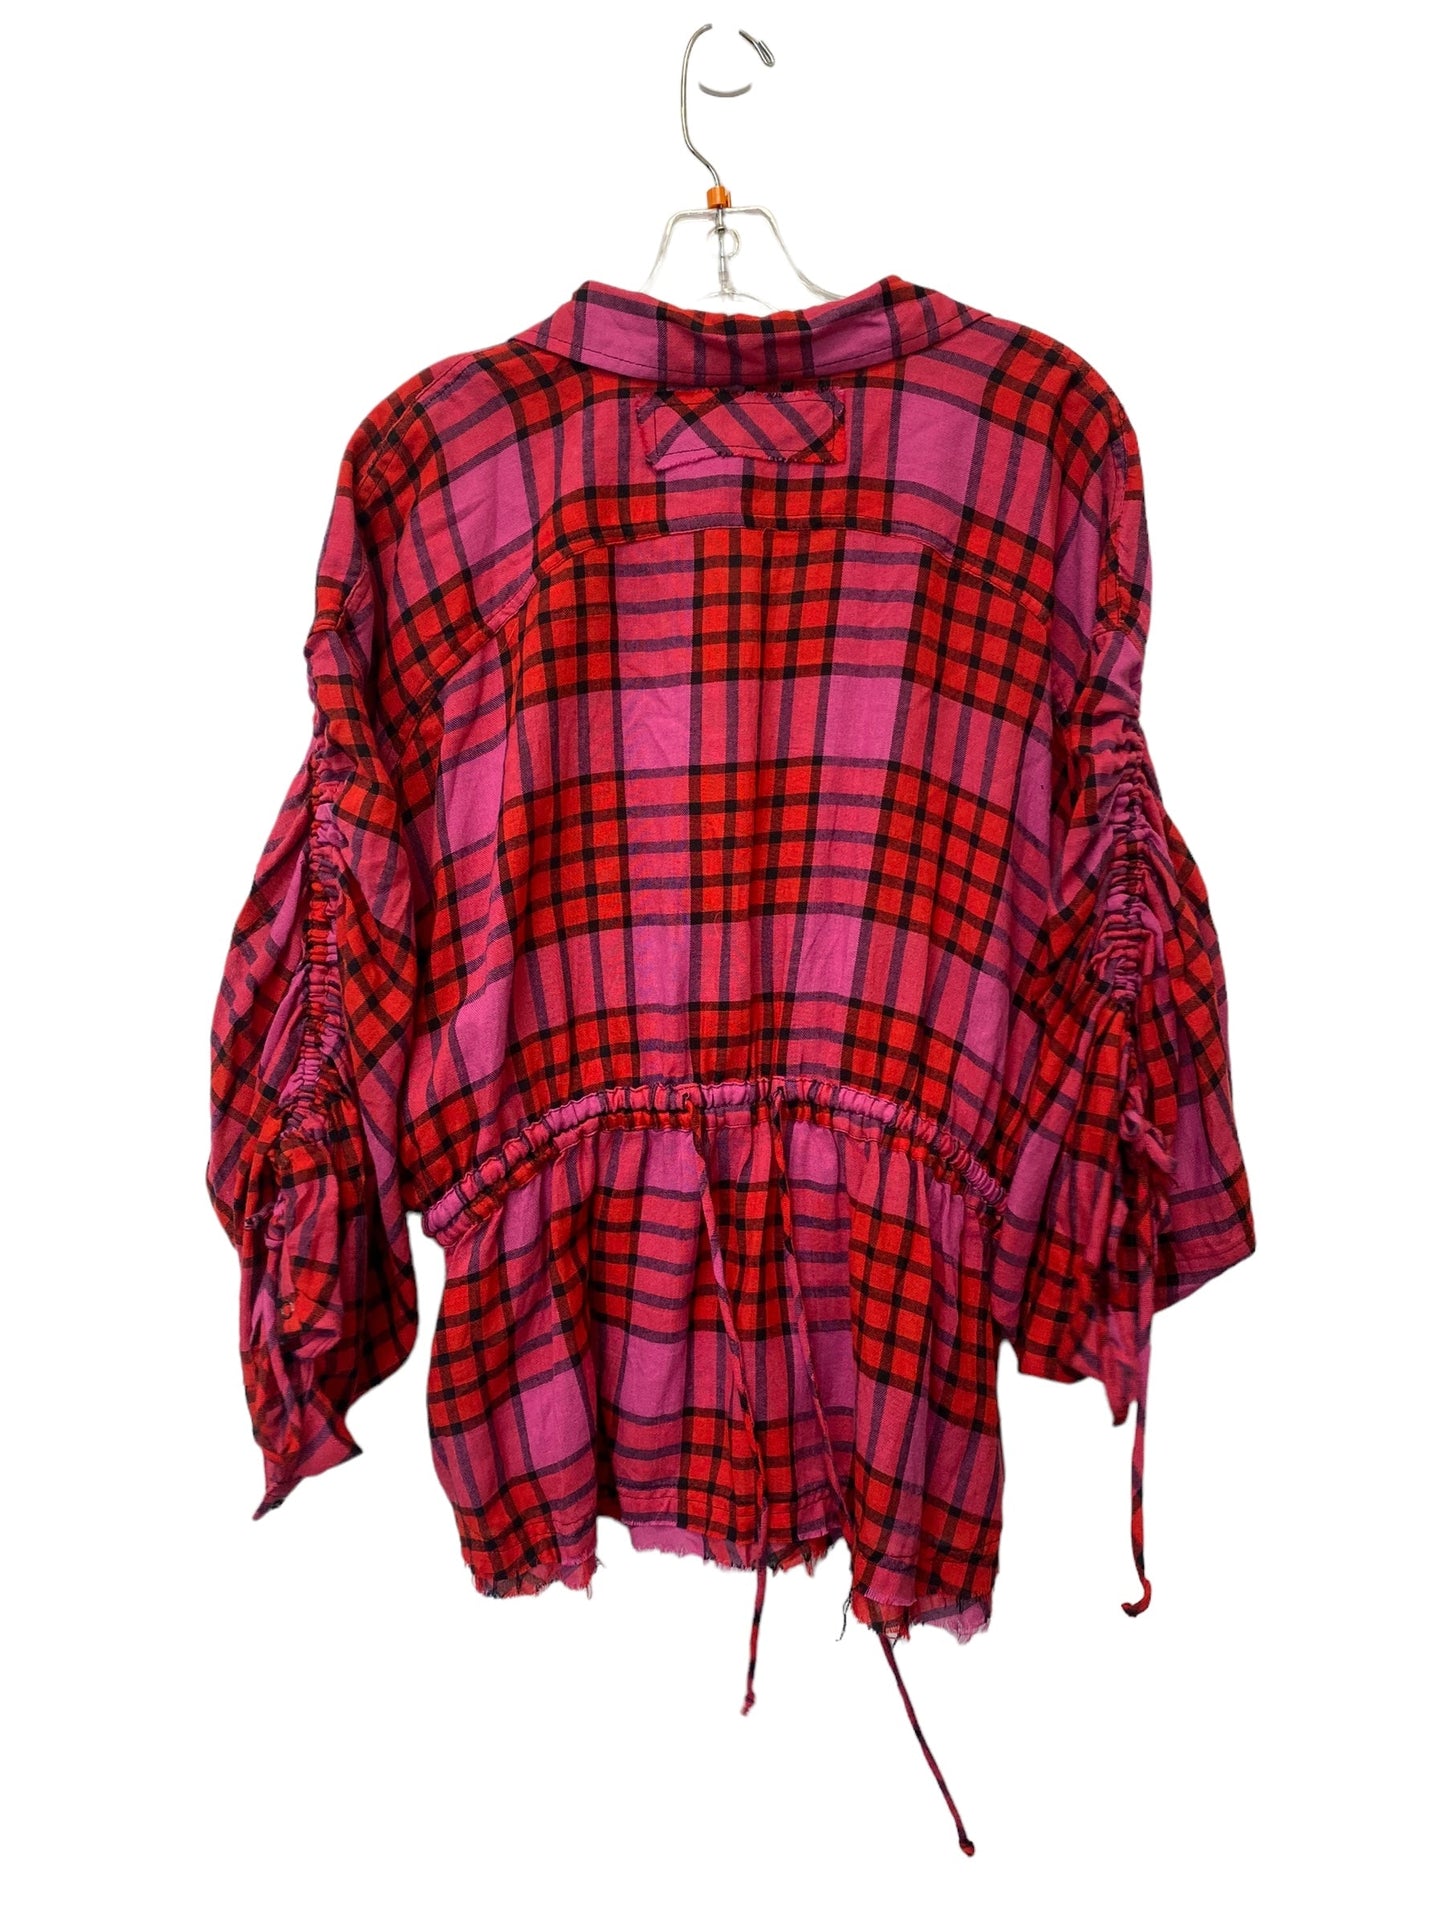 Plaid Pattern Top Long Sleeve We The Free, Size L